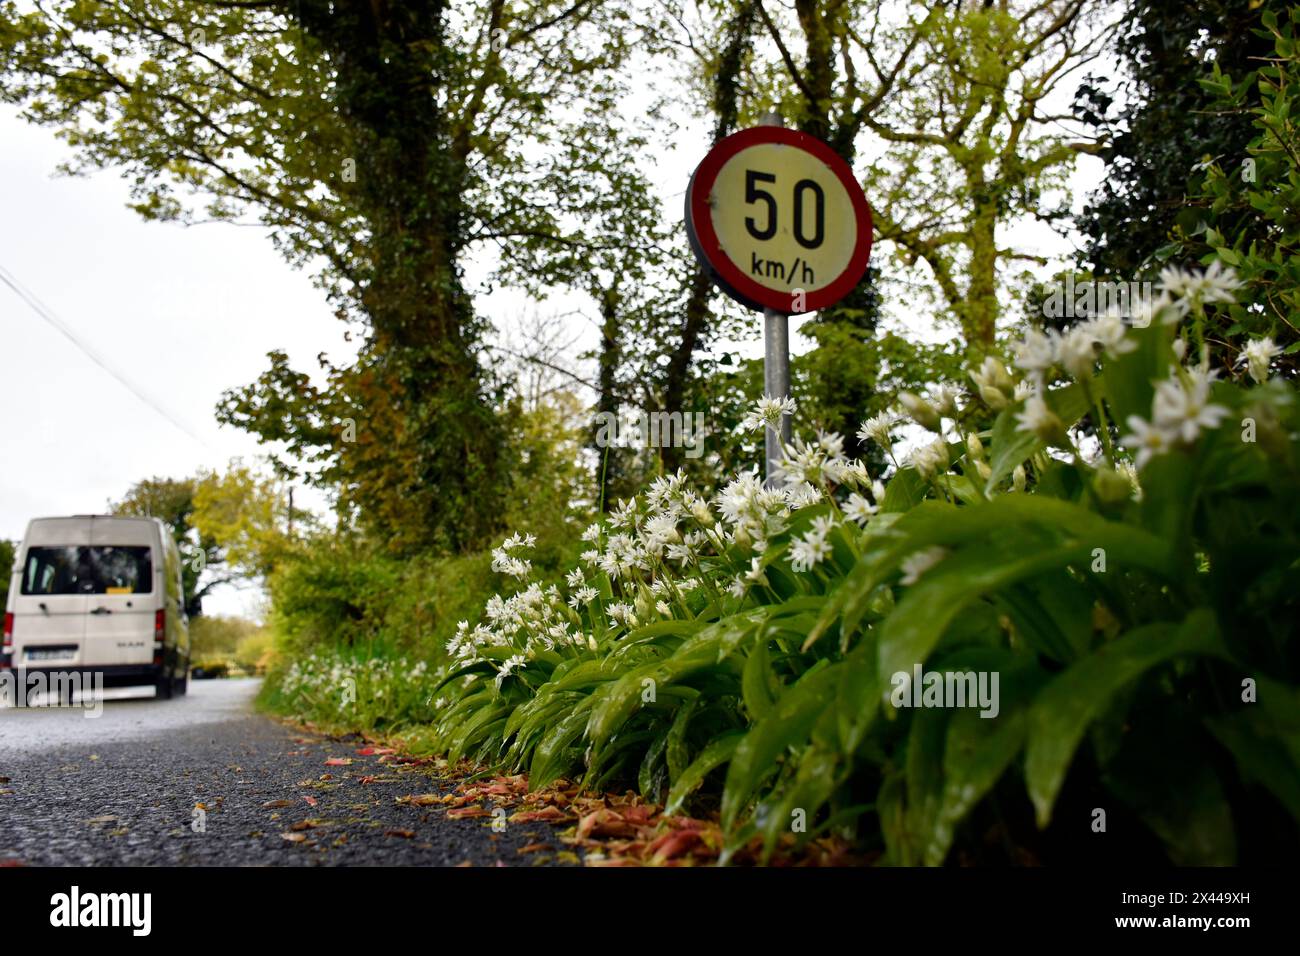 Speed limit sign in rural Ireland. Wid garlic grows on verge in County Donegal. Stock Photo